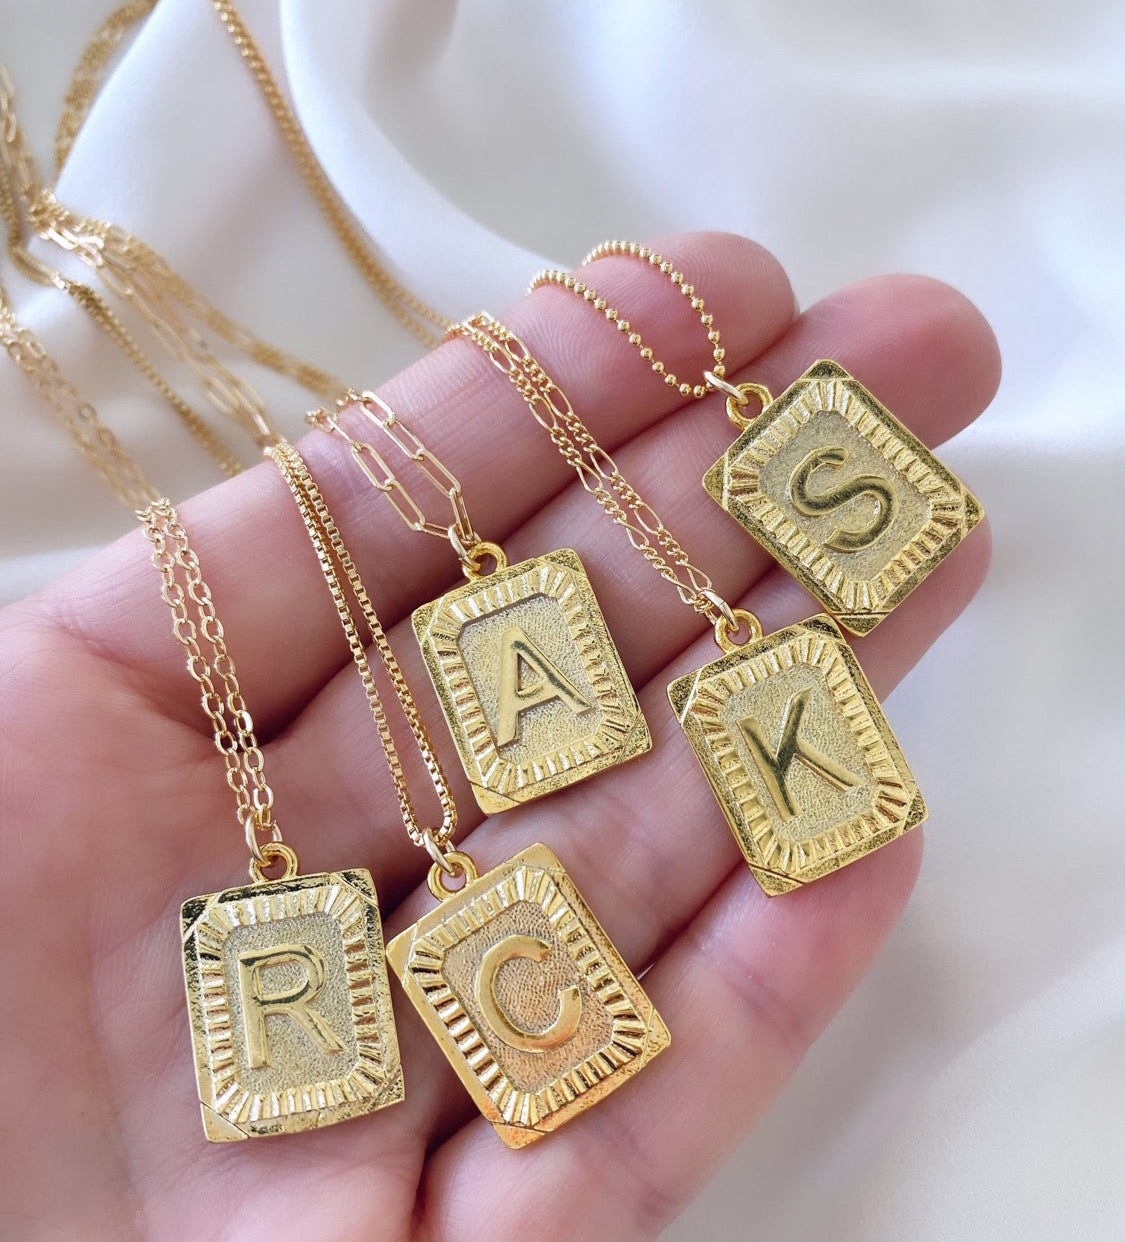 Personalization Jewelry Collection for Jewelry